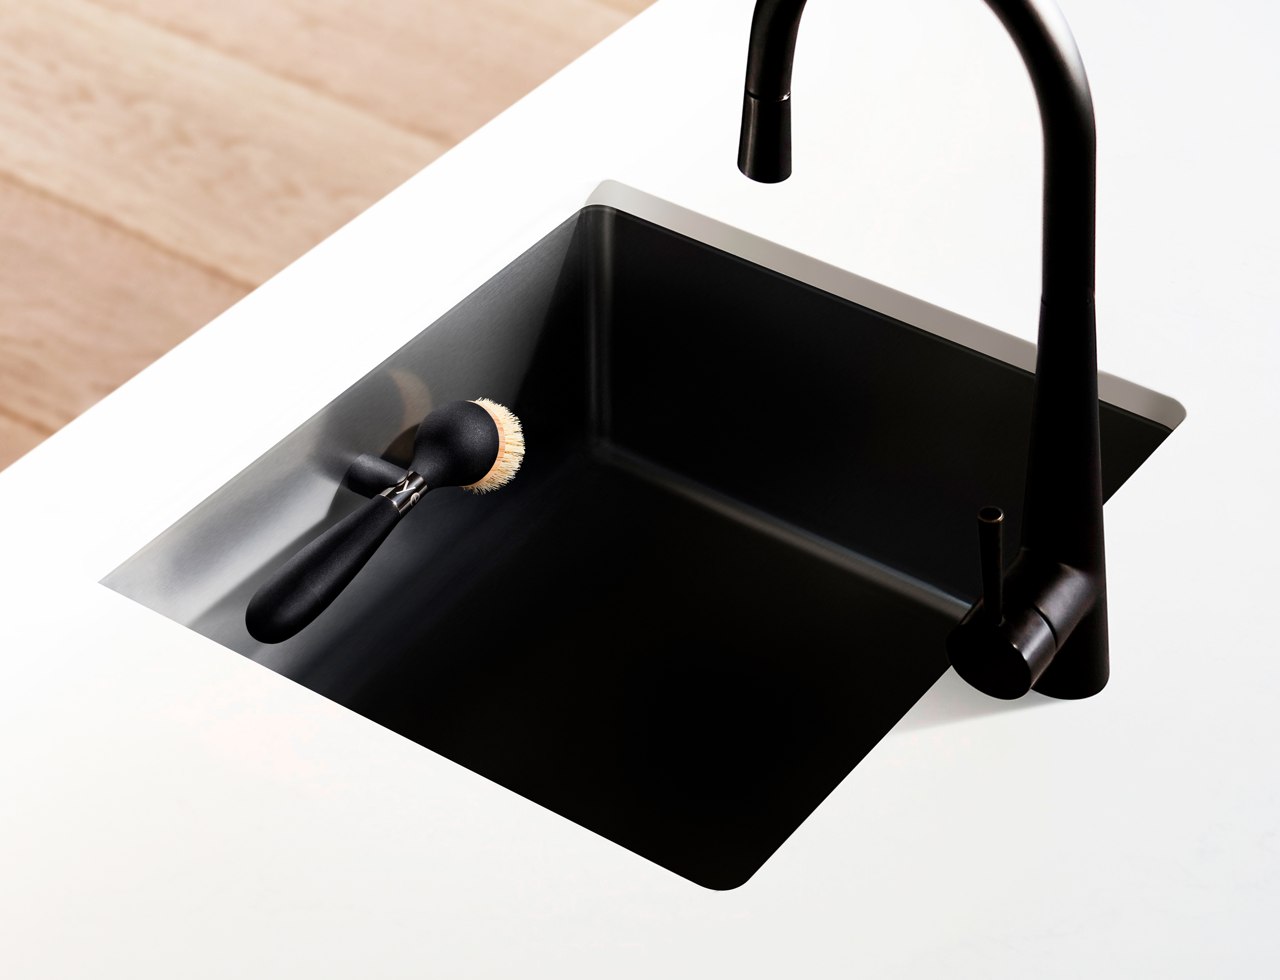 This sleek soap-dispensing dish brush could easily be the most